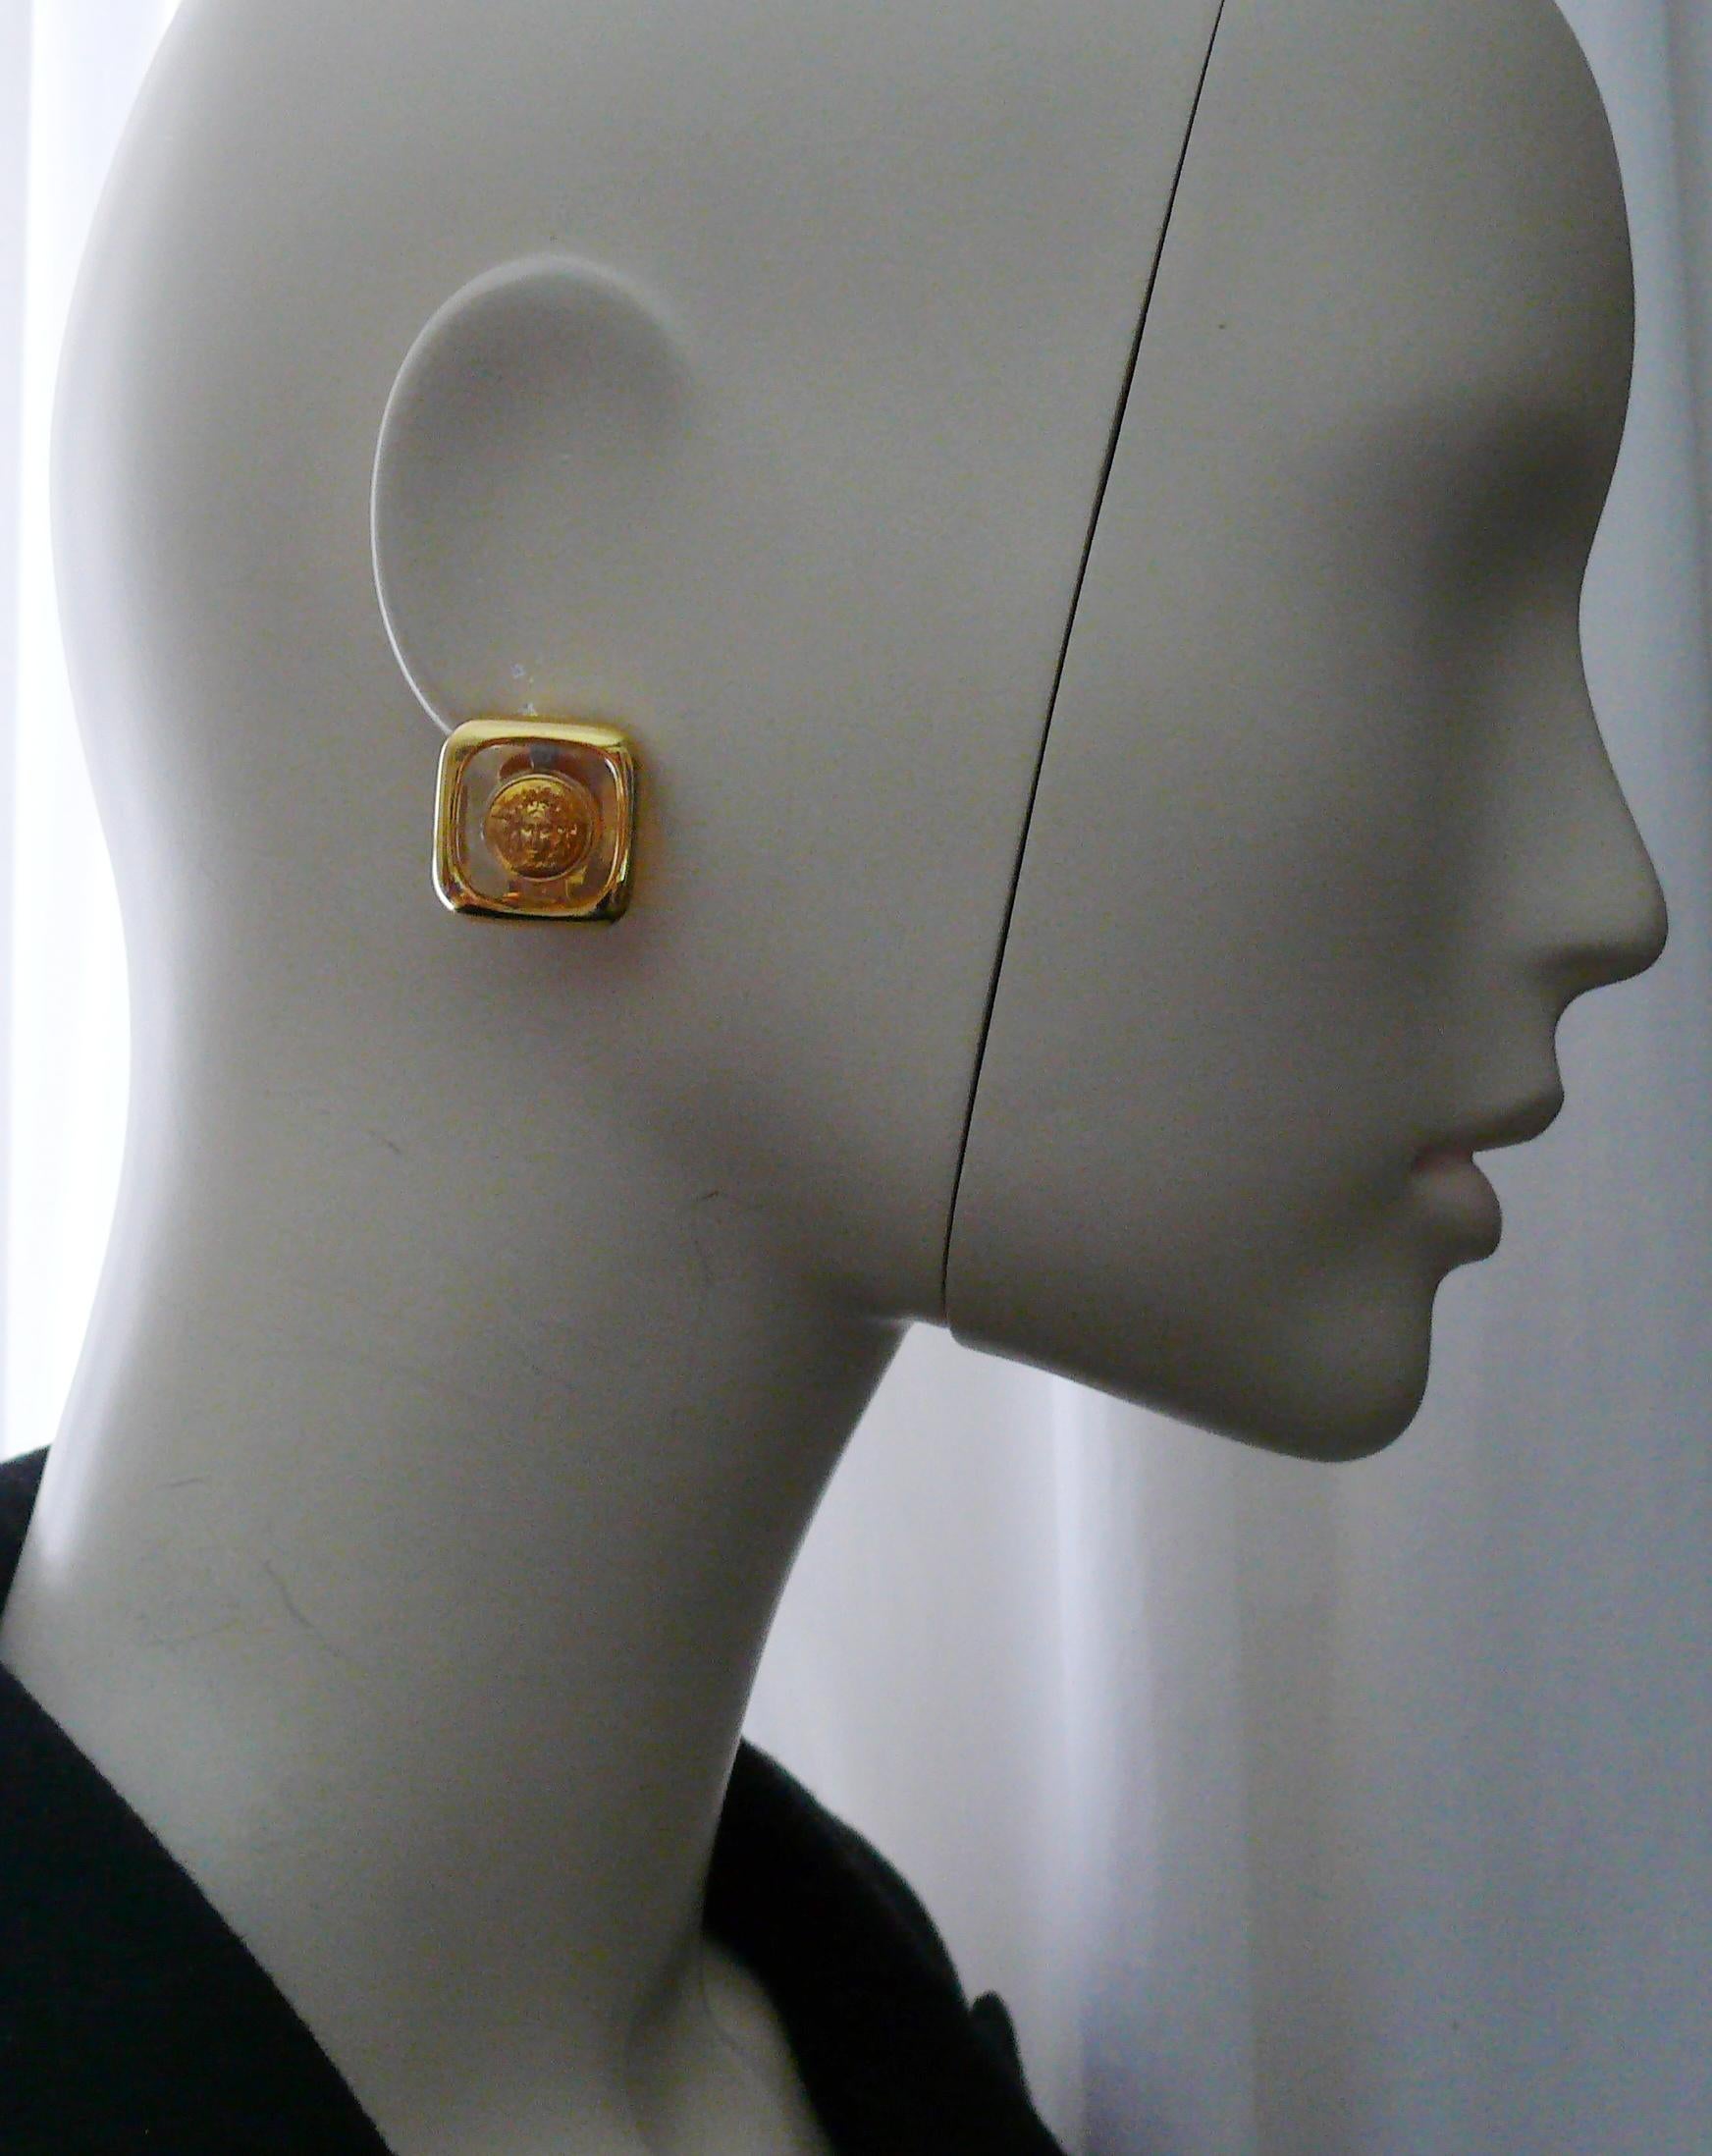 GIANNI VERSACE vintage gold toned clip-on earrings featuring a lucite center with a MEDUSA coin inlaid.

Embossed GIANNI VERSACE Made in Italy.

Indicative measurements : approx. 2.1 cm x 2.2 cm (0.83 inches x 0.87 inches).

Comes with the original